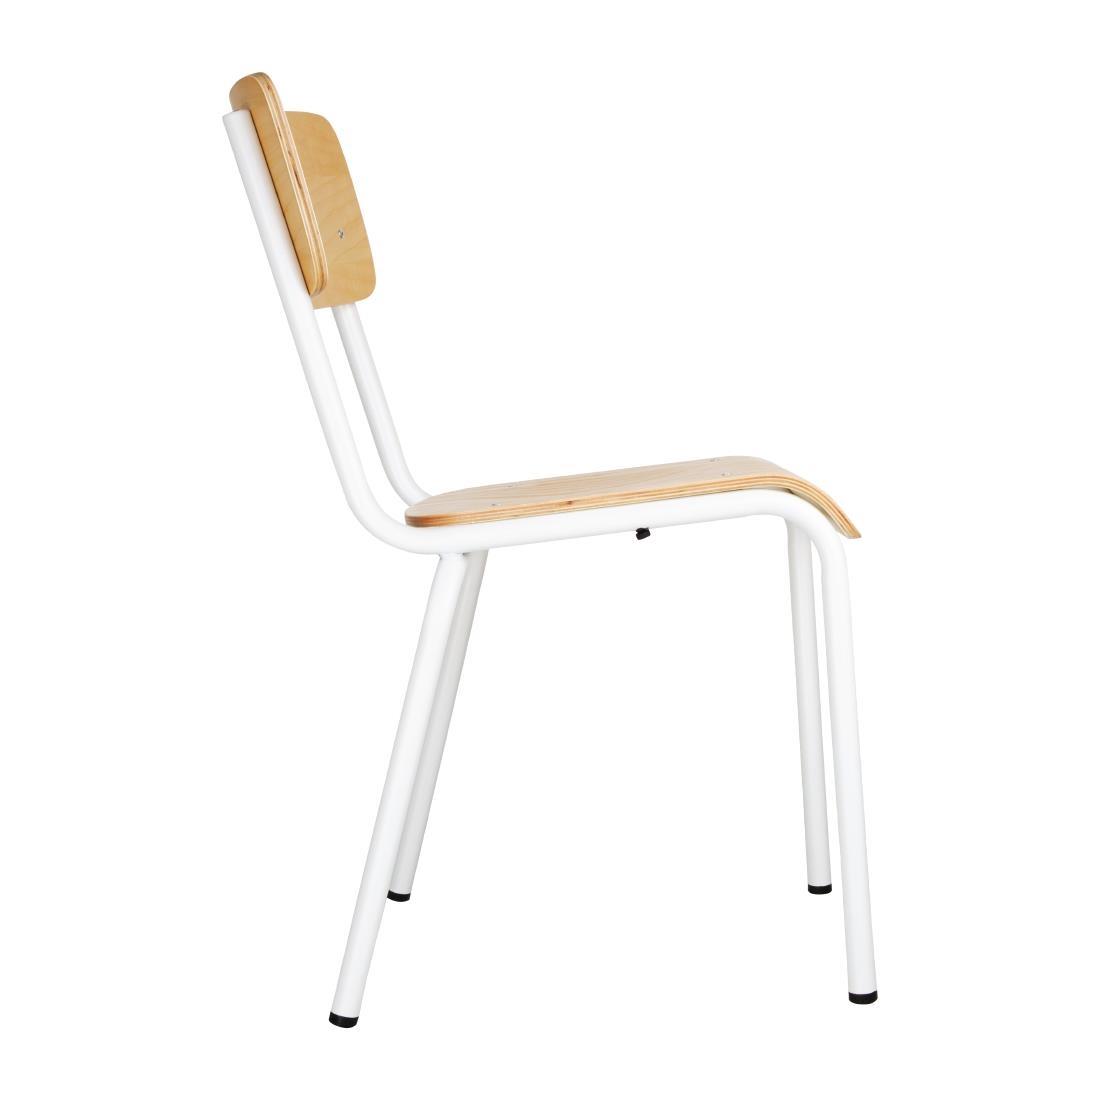 Bolero Cantina Side Chairs with Wooden Seat Pad and Backrest White (Pack of 4) - FB945  - 2